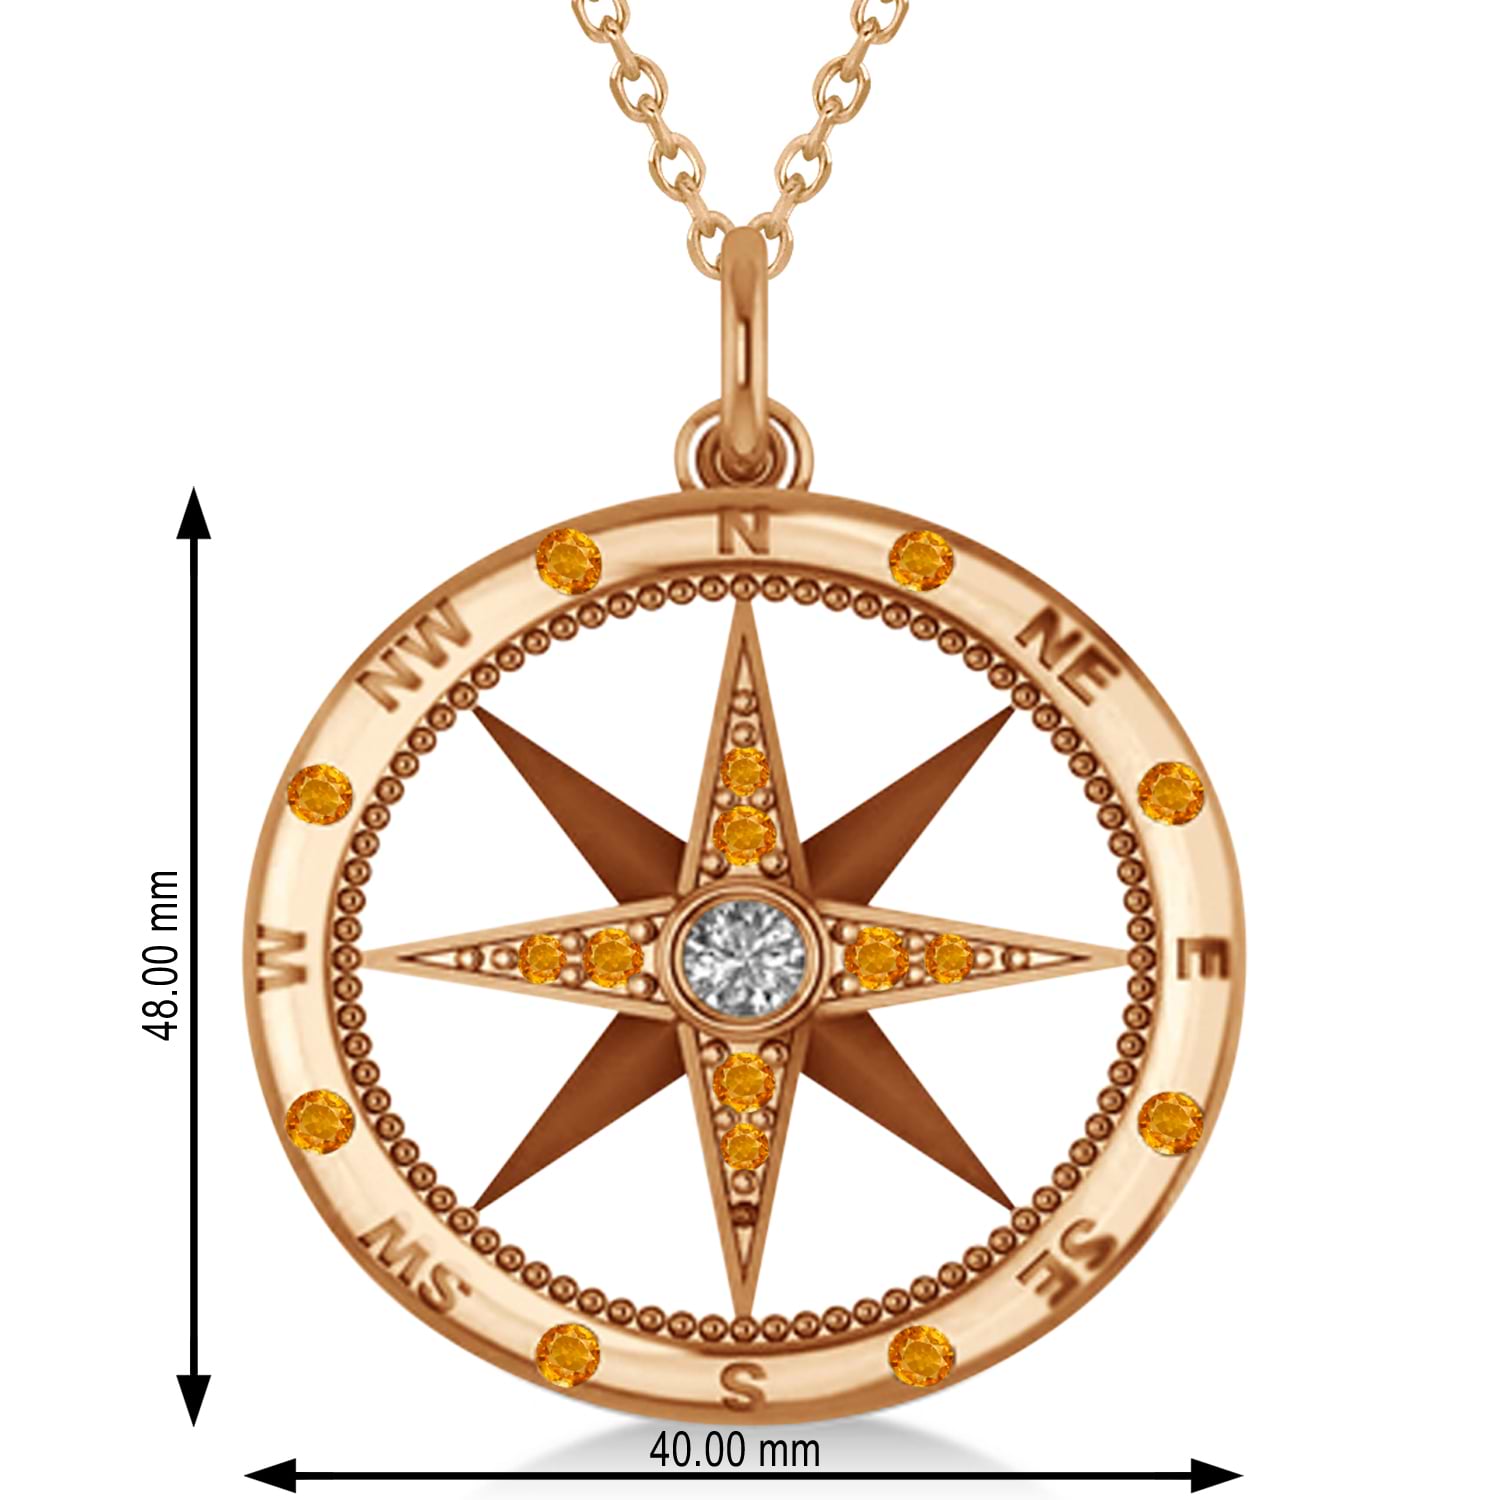 North Star Compass Necklace – Whiskeyjack Boutique